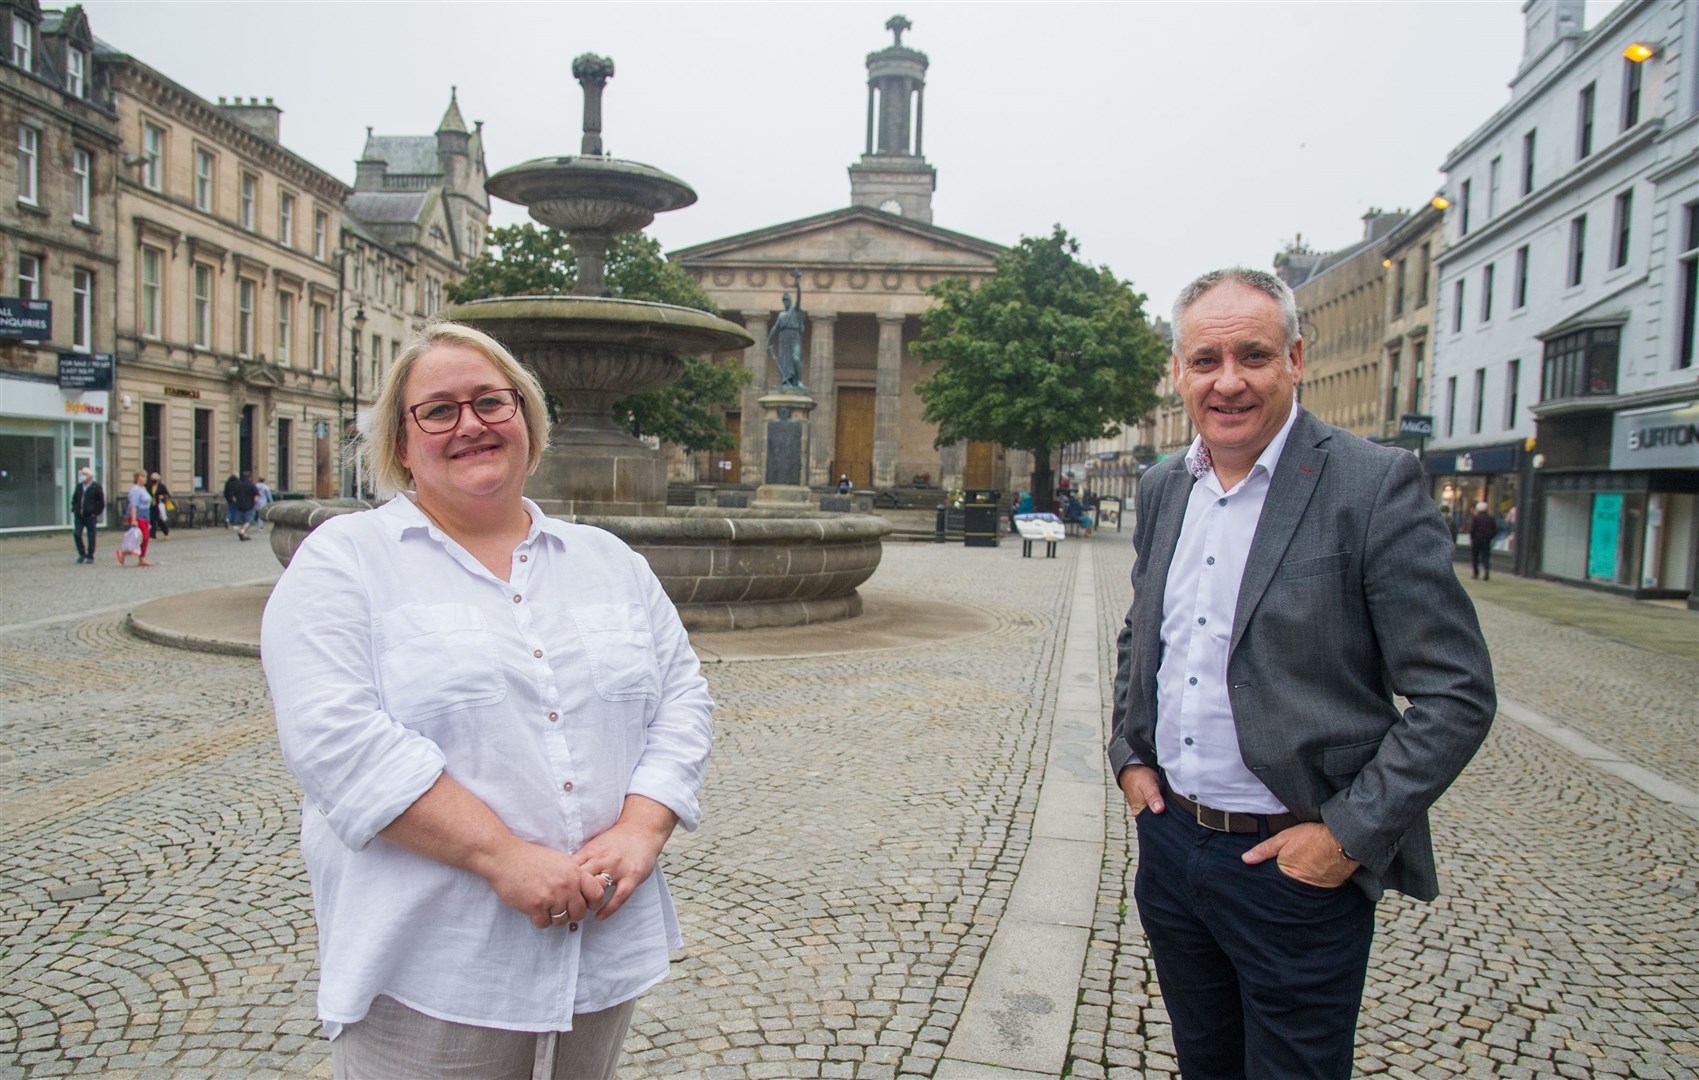 Debi Weir, who's pictured with Richard Lochhead, will attend the official opening of the Scottish Parliament on October 2. Picture: Becky Saunderson..